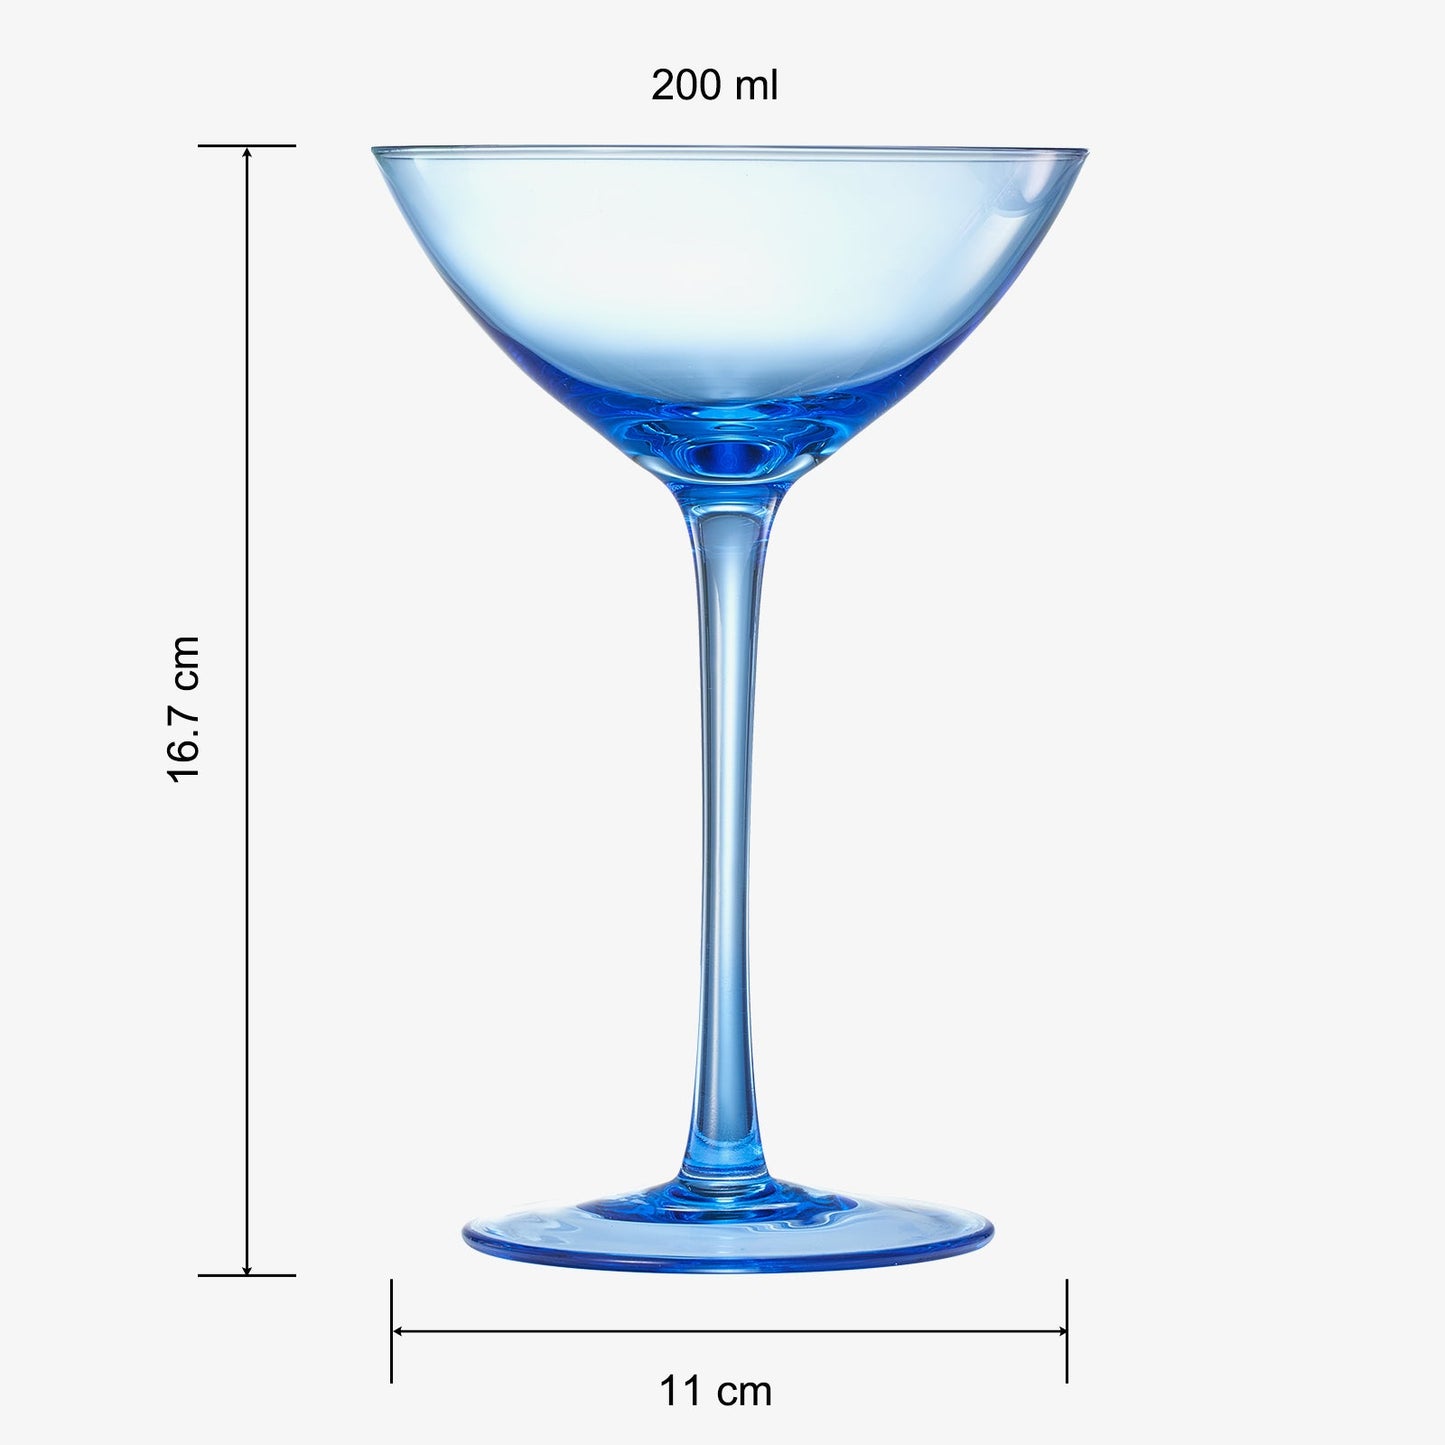 Colored Coupe Glasses Set of 6 | 12 oz